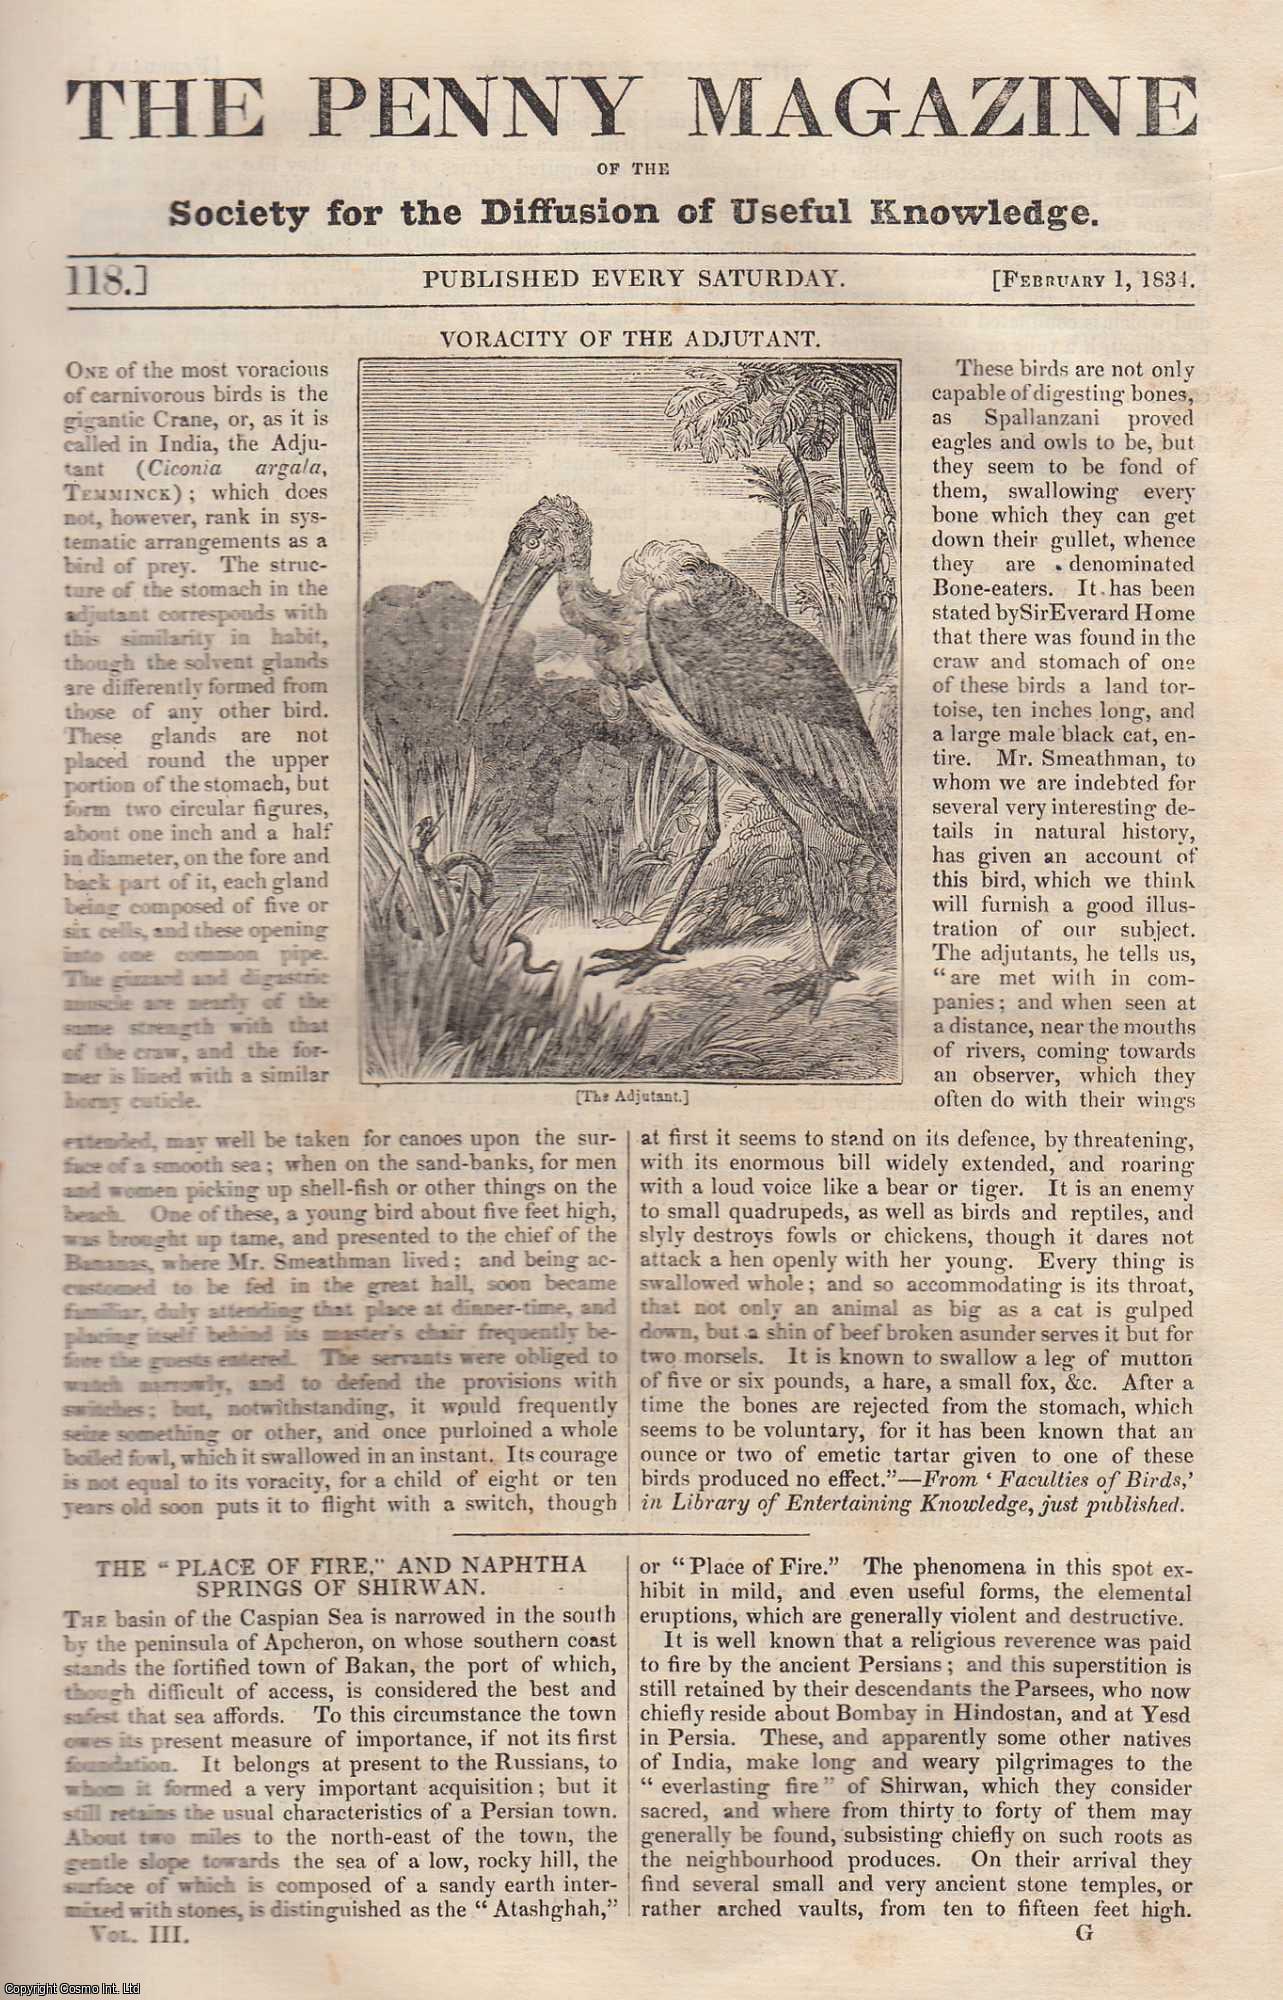 --- - Voracity of The Adjutant (carnivorous bird); The Place of Fire, and Naphtha Springs of Shirwan; English Management of Draught Horses; The City of Balbec, Syria; Professions and Trades of The Metropolis, etc. Issue No. 118, February 1st, 1834. A complete rare weekly issue of the Penny Magazine, 1834.